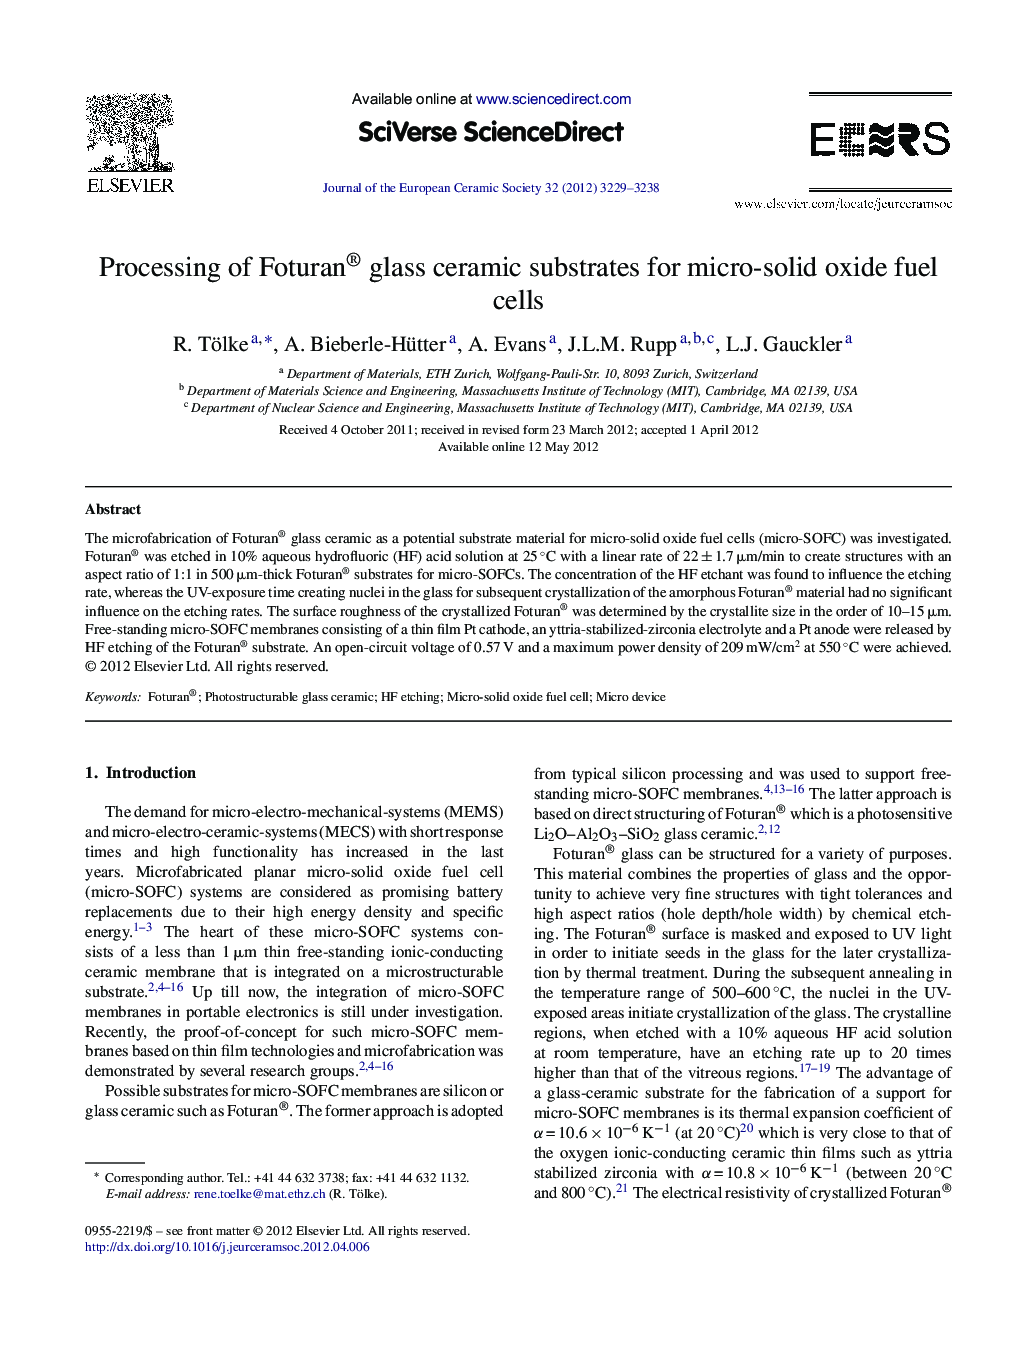 Processing of Foturan® glass ceramic substrates for micro-solid oxide fuel cells